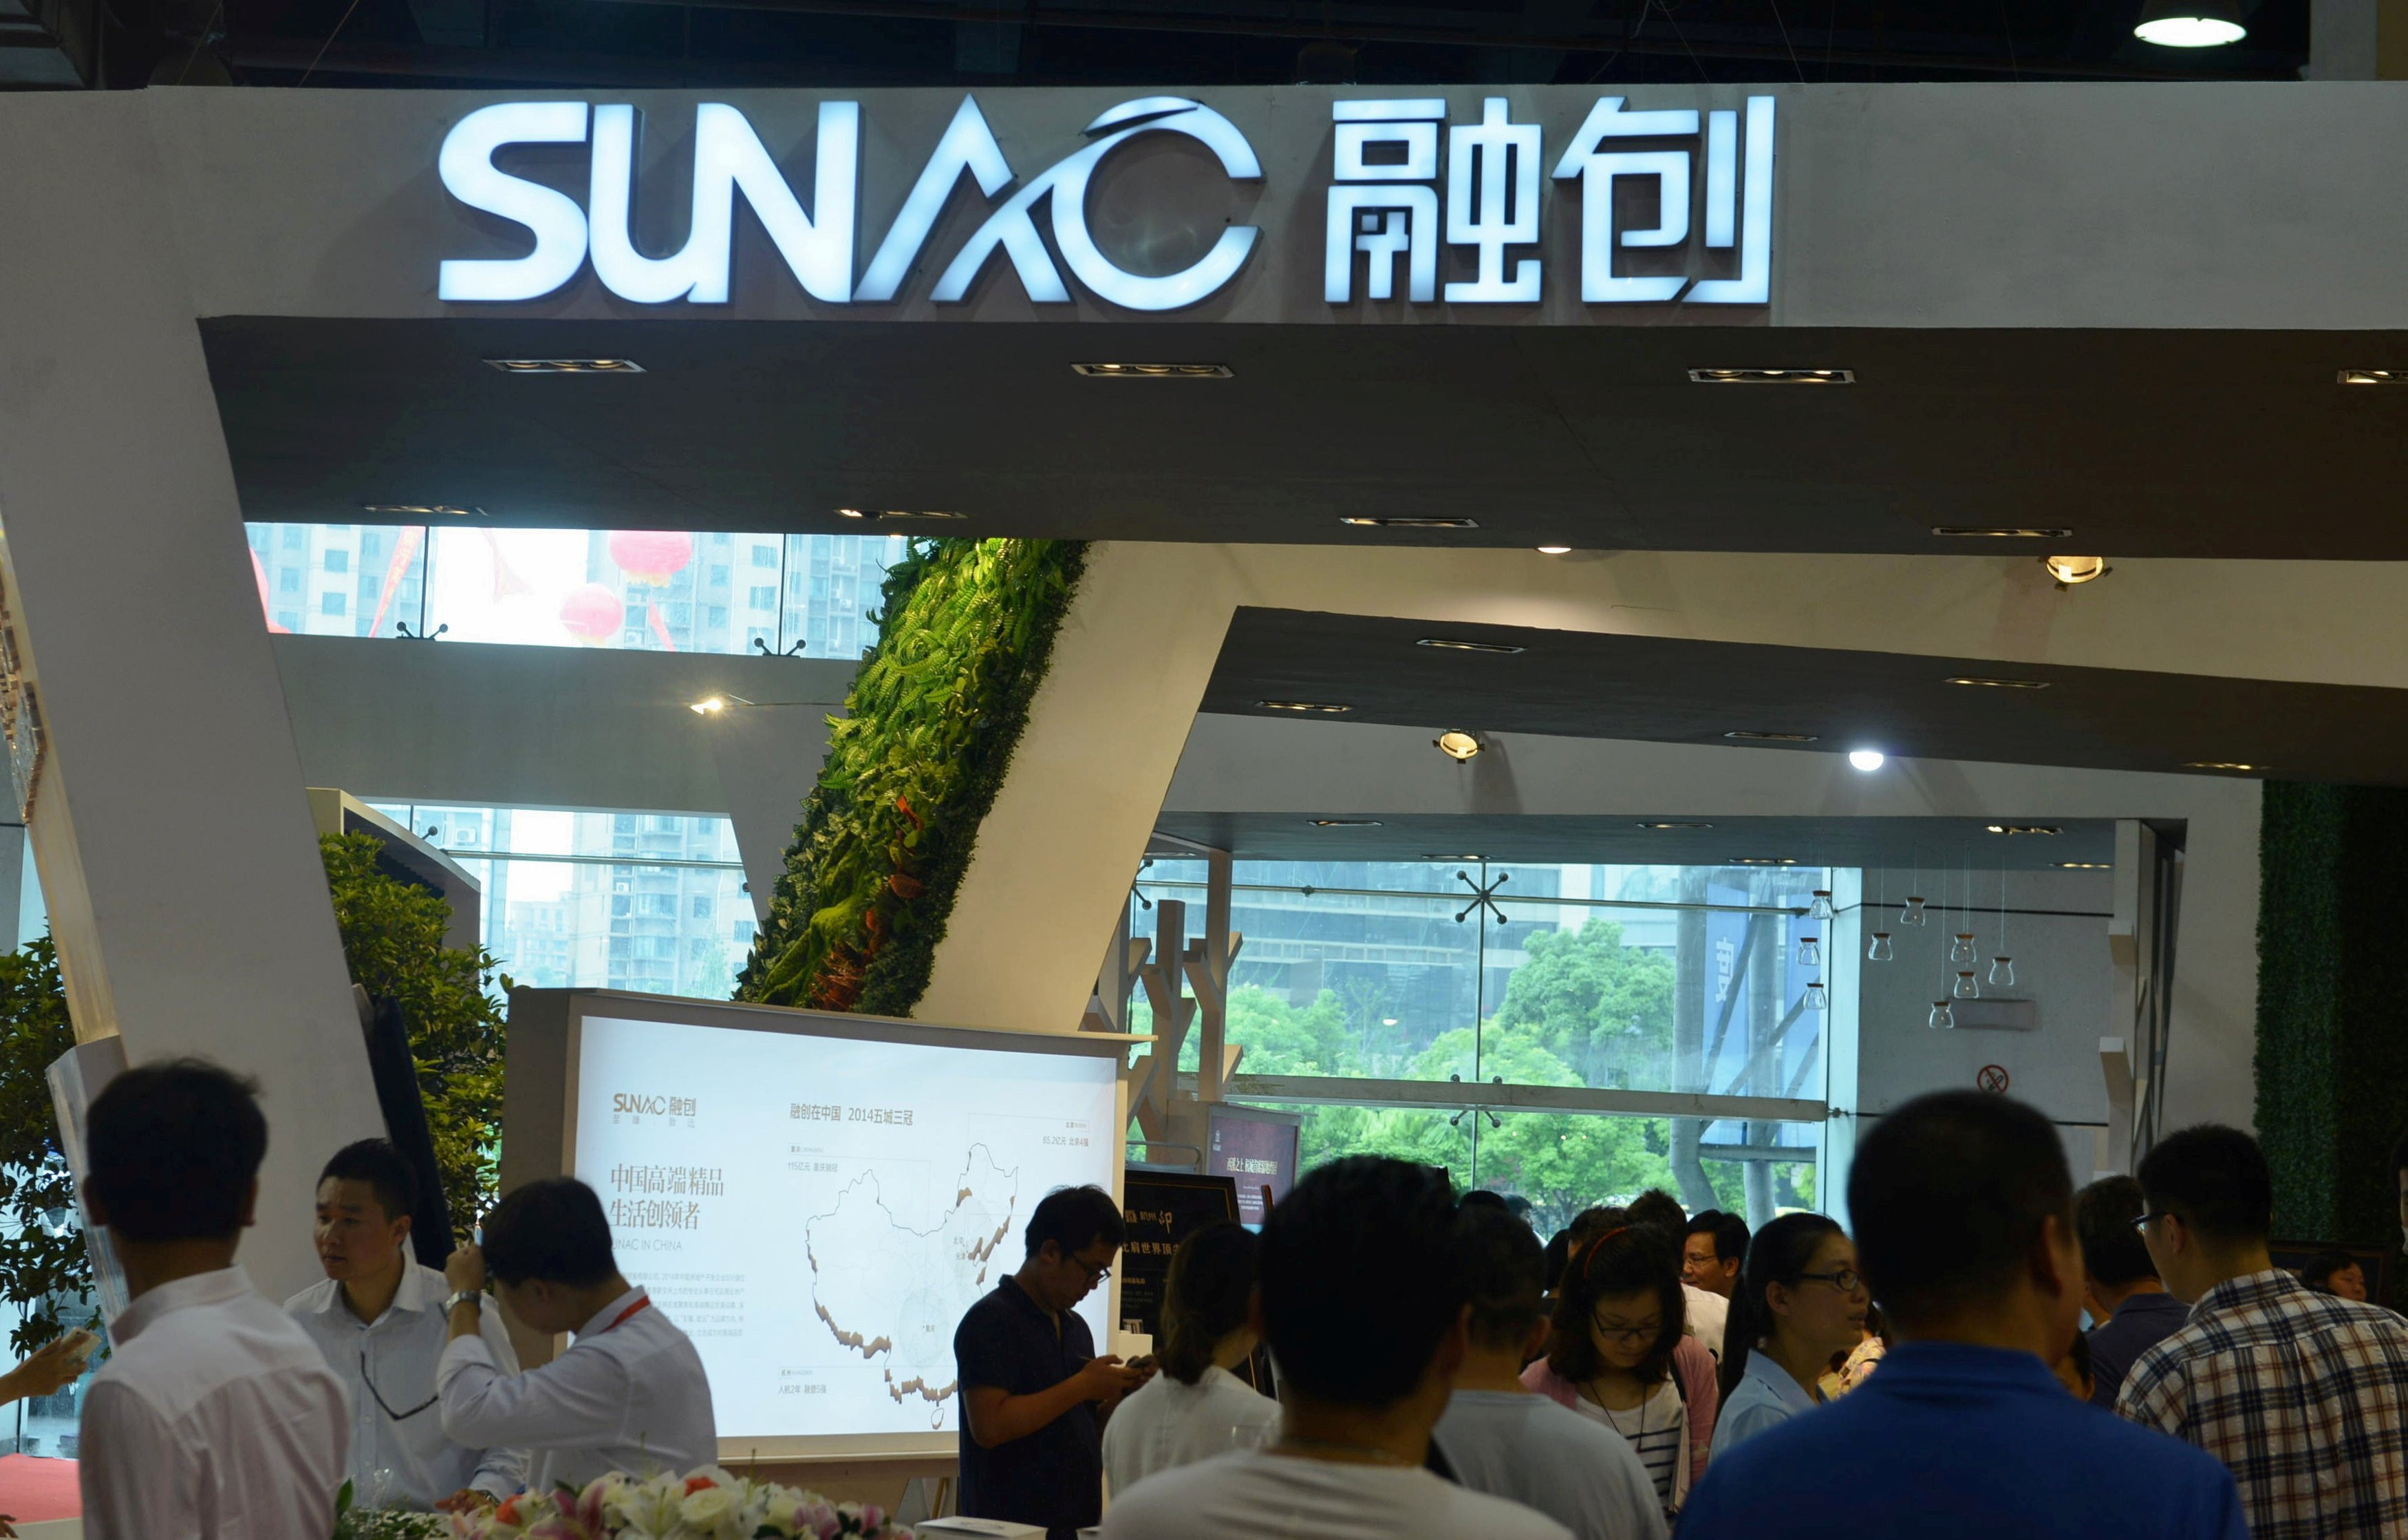 Sunac China Holdings Sunac China Holdings has now written off most of its investment in Leshi Internet Information and Technology, setting aside 16.6 billion yuan (US$2.64 billion) to cover its losses. Photo: Reuters